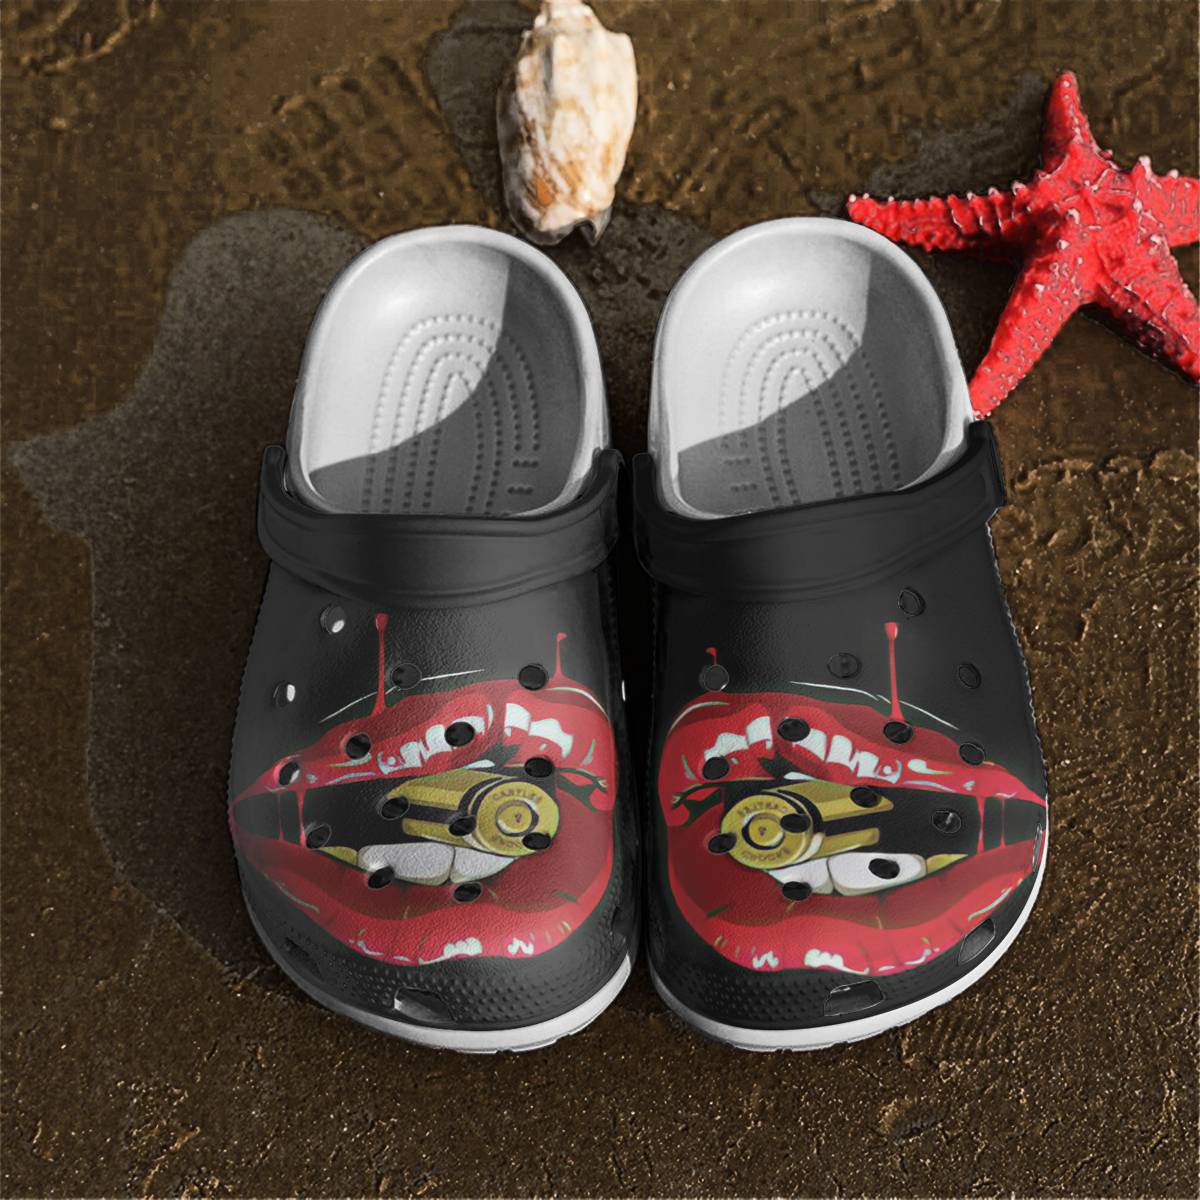 The Rolling Stones Bullet in Mouth Crocs - Extra-Licks™